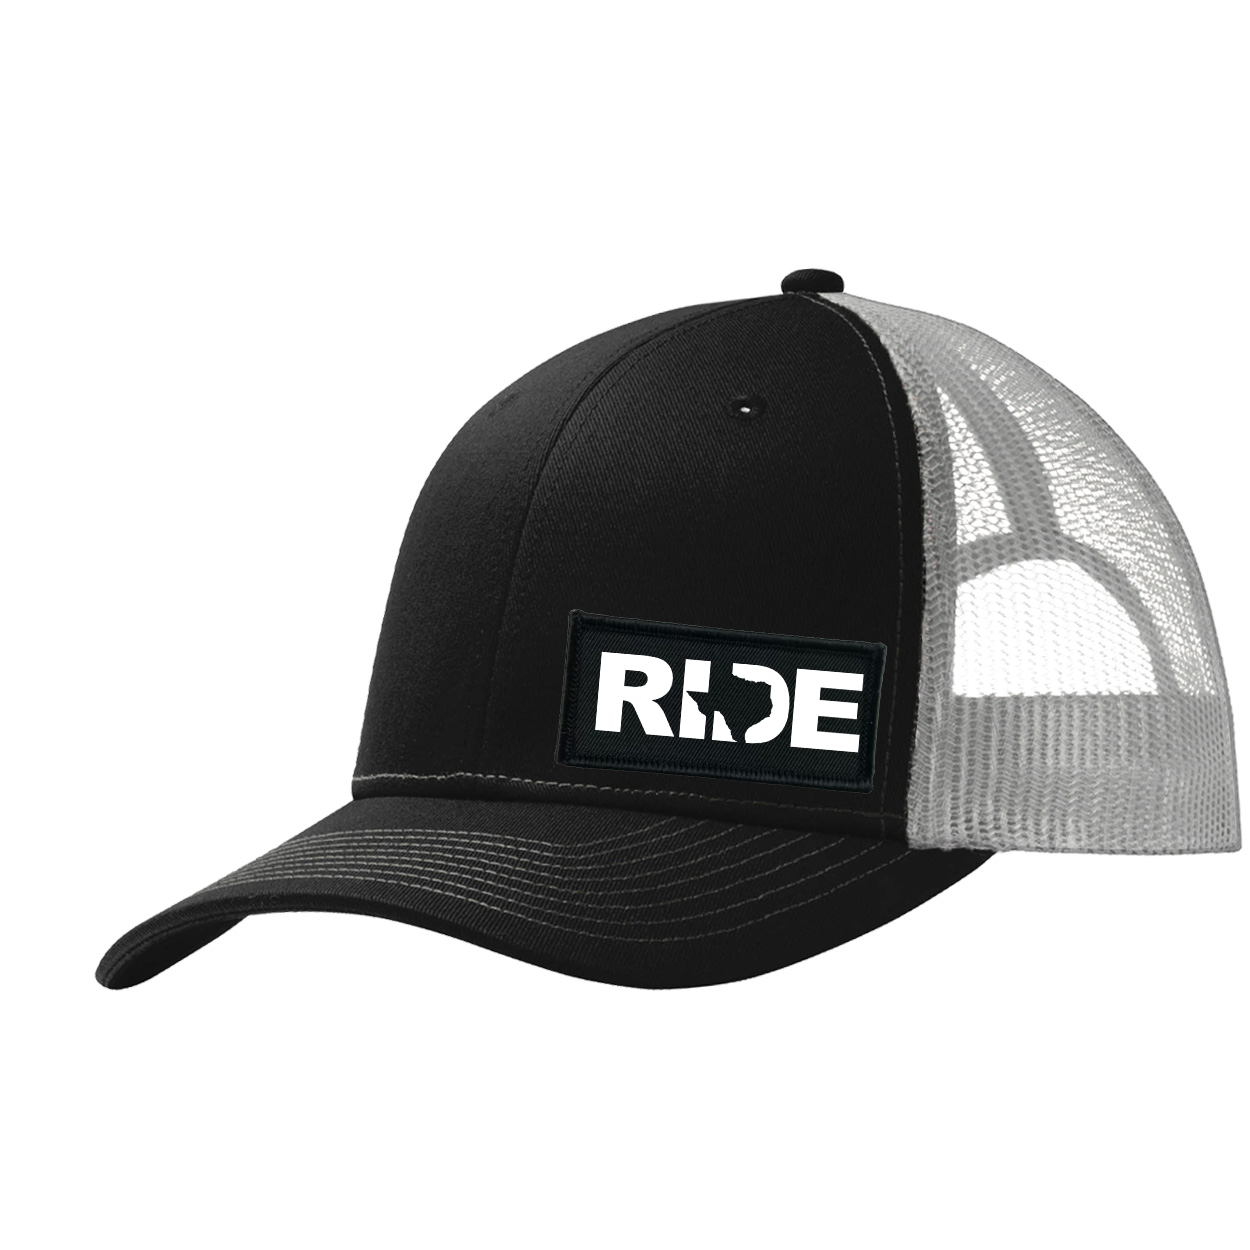 Ride Texas Night Out Woven Patch Snapback Trucker Hat Black/Gray 